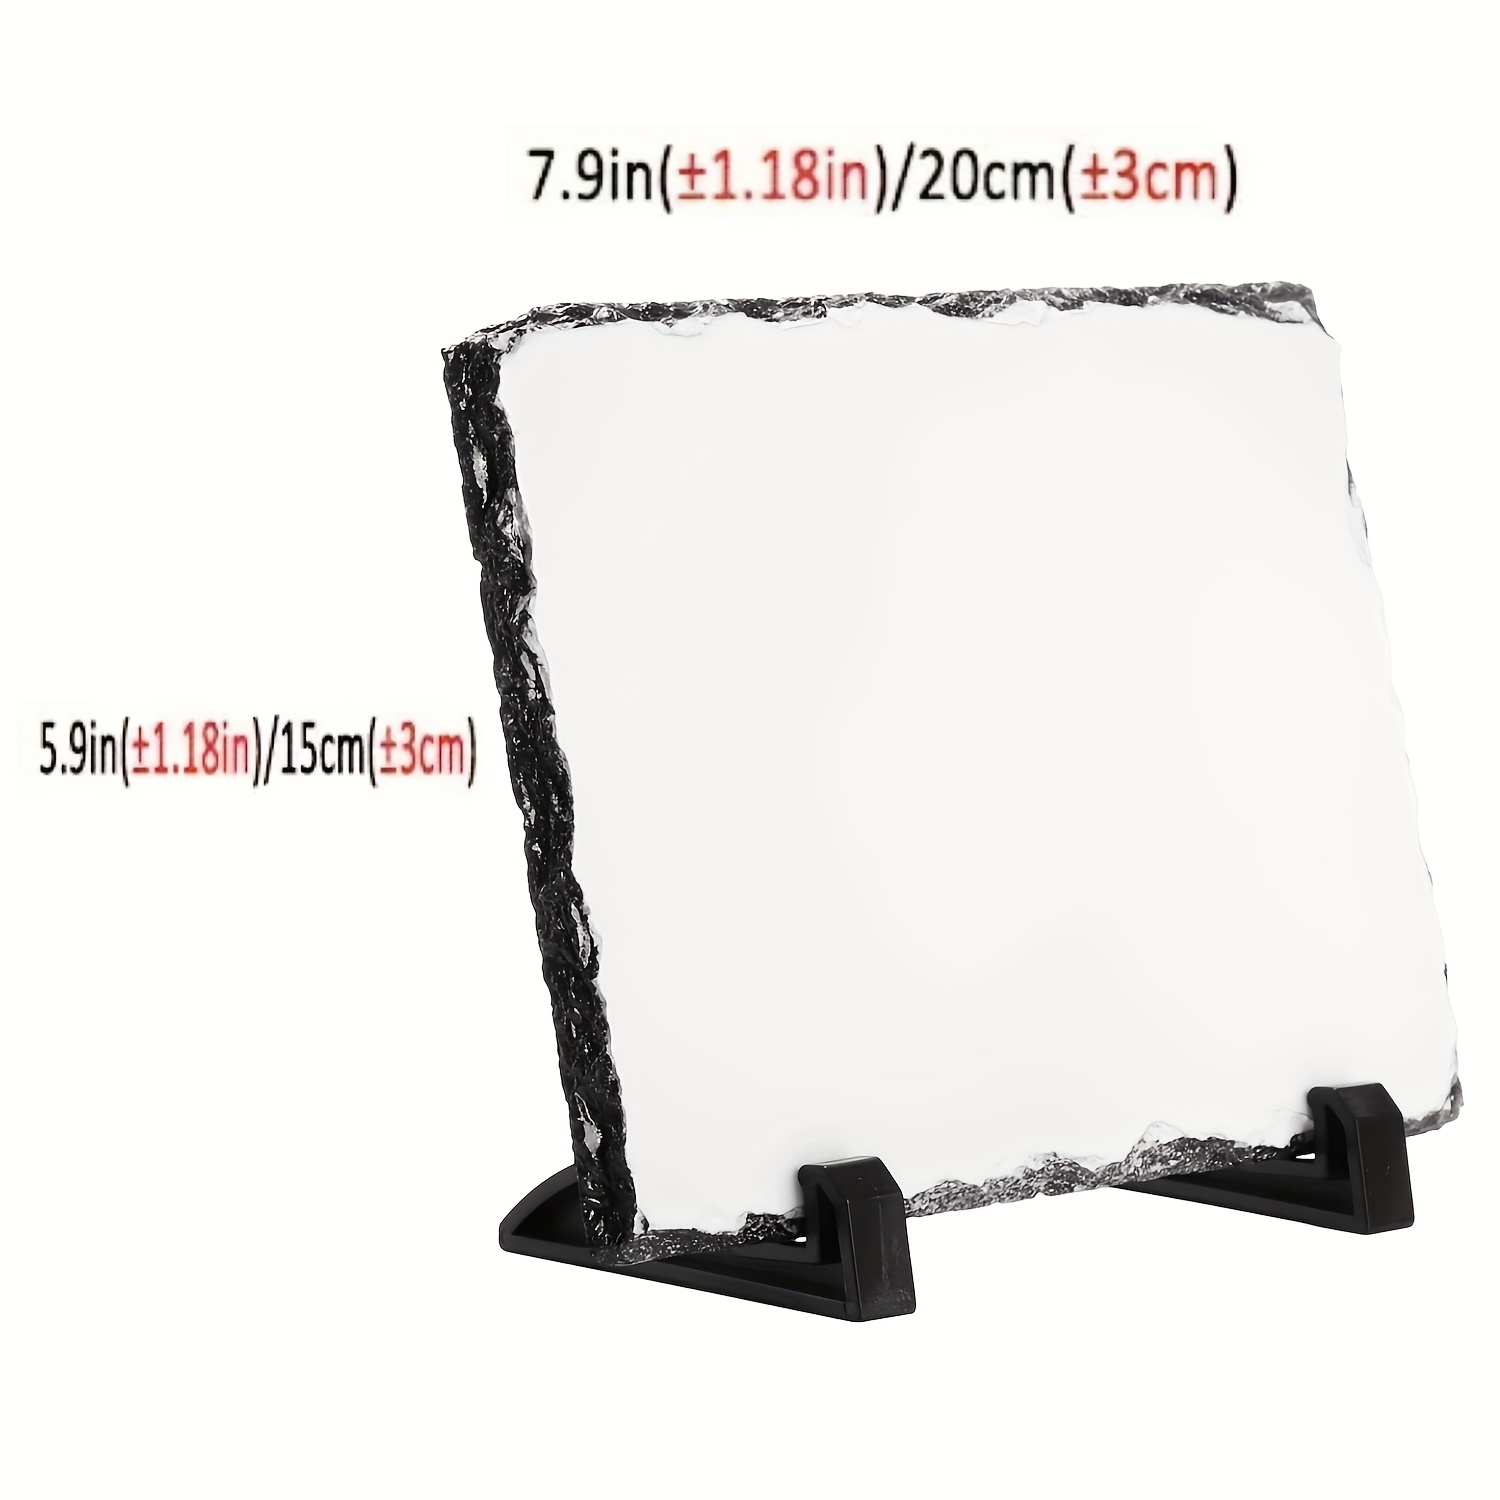 Customizable Sublimation Photo Slates For DIY Printing And Stationery Blank  Rock Plaque Stones For Heat Transfer From Hx_zaka, $2.3